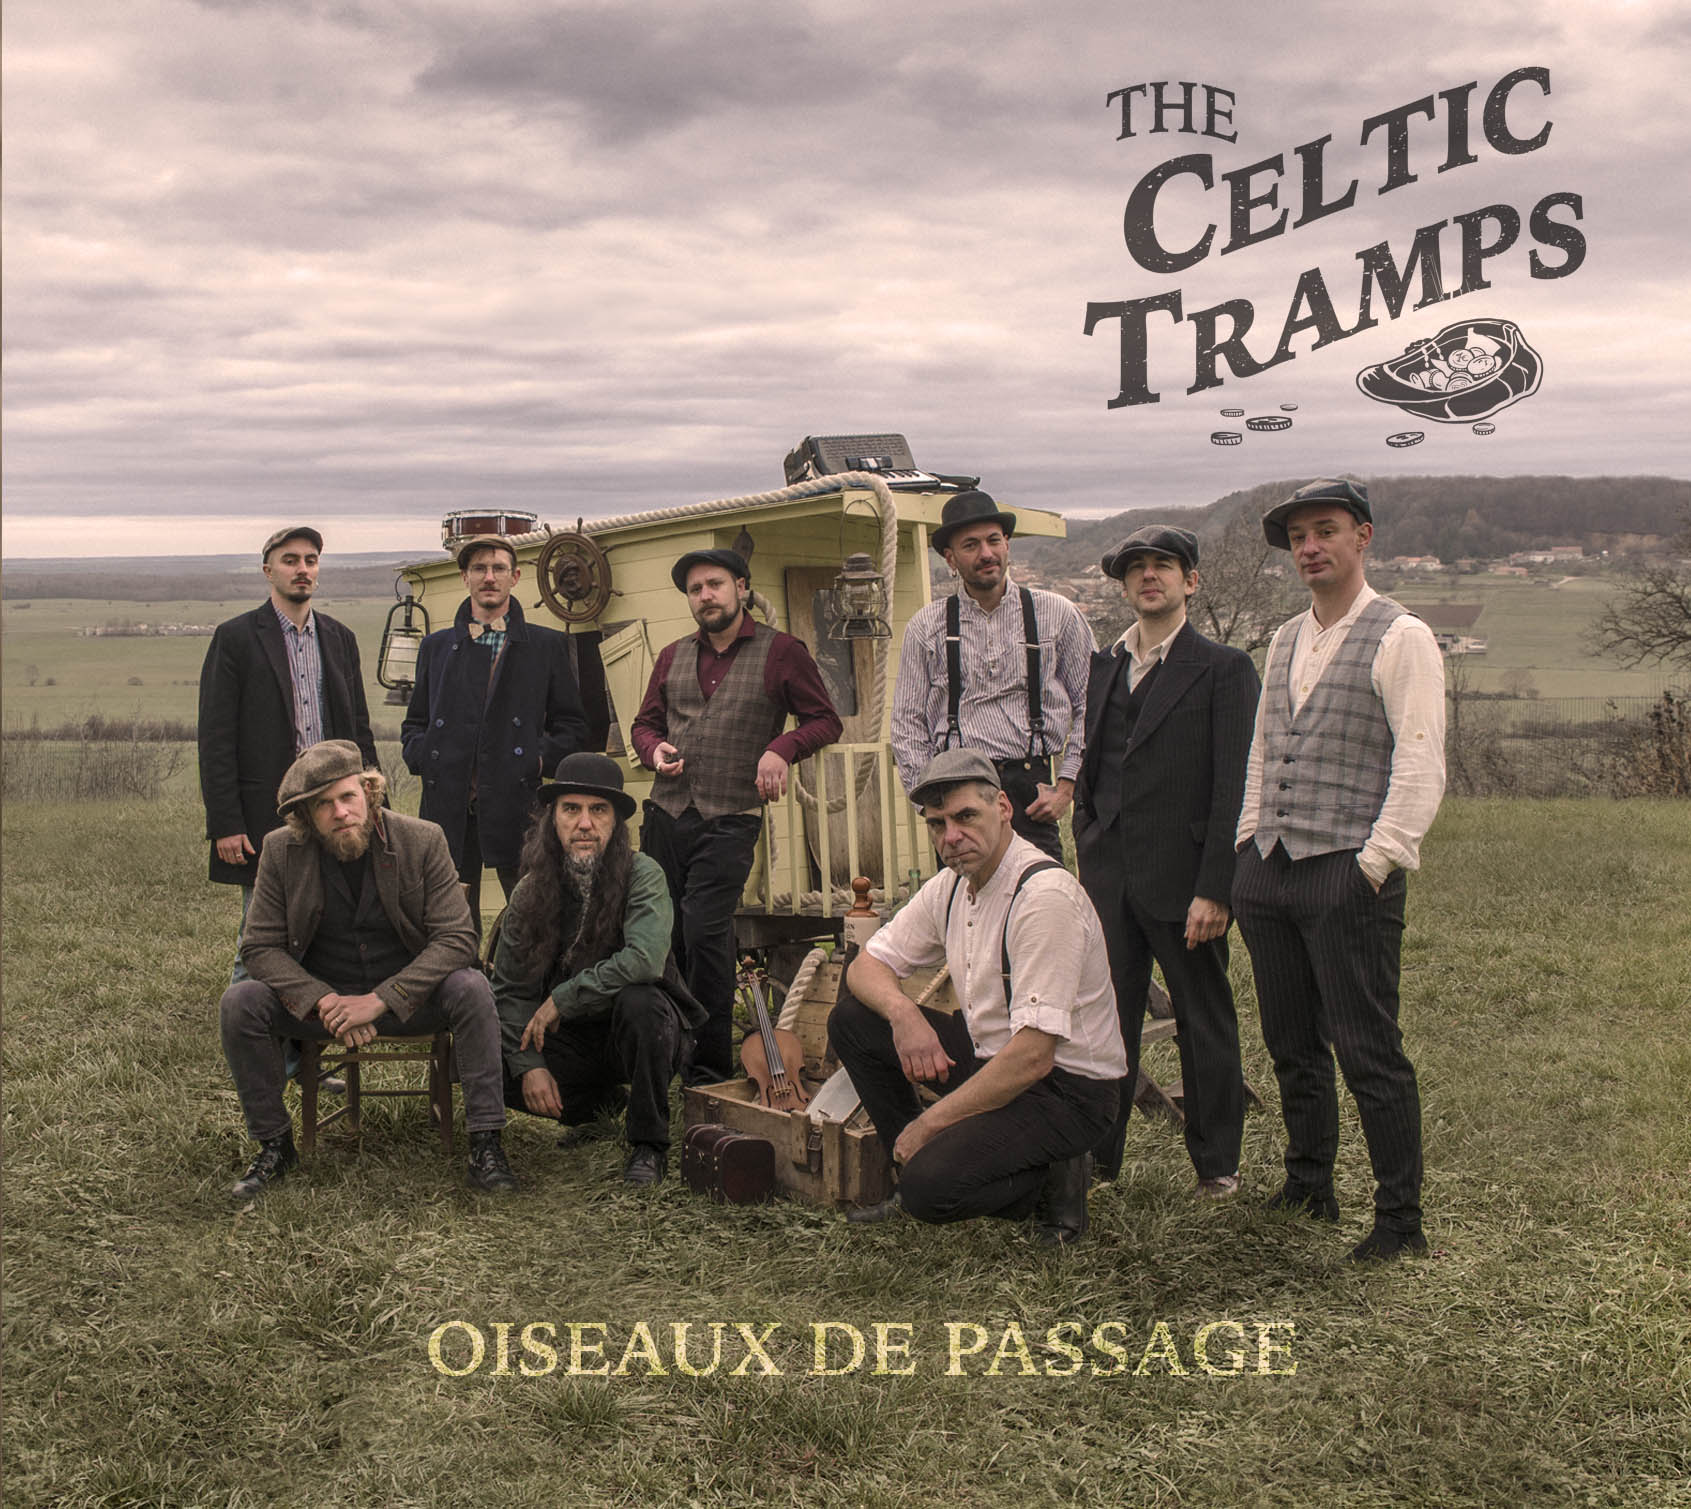 The Celtic Tramps